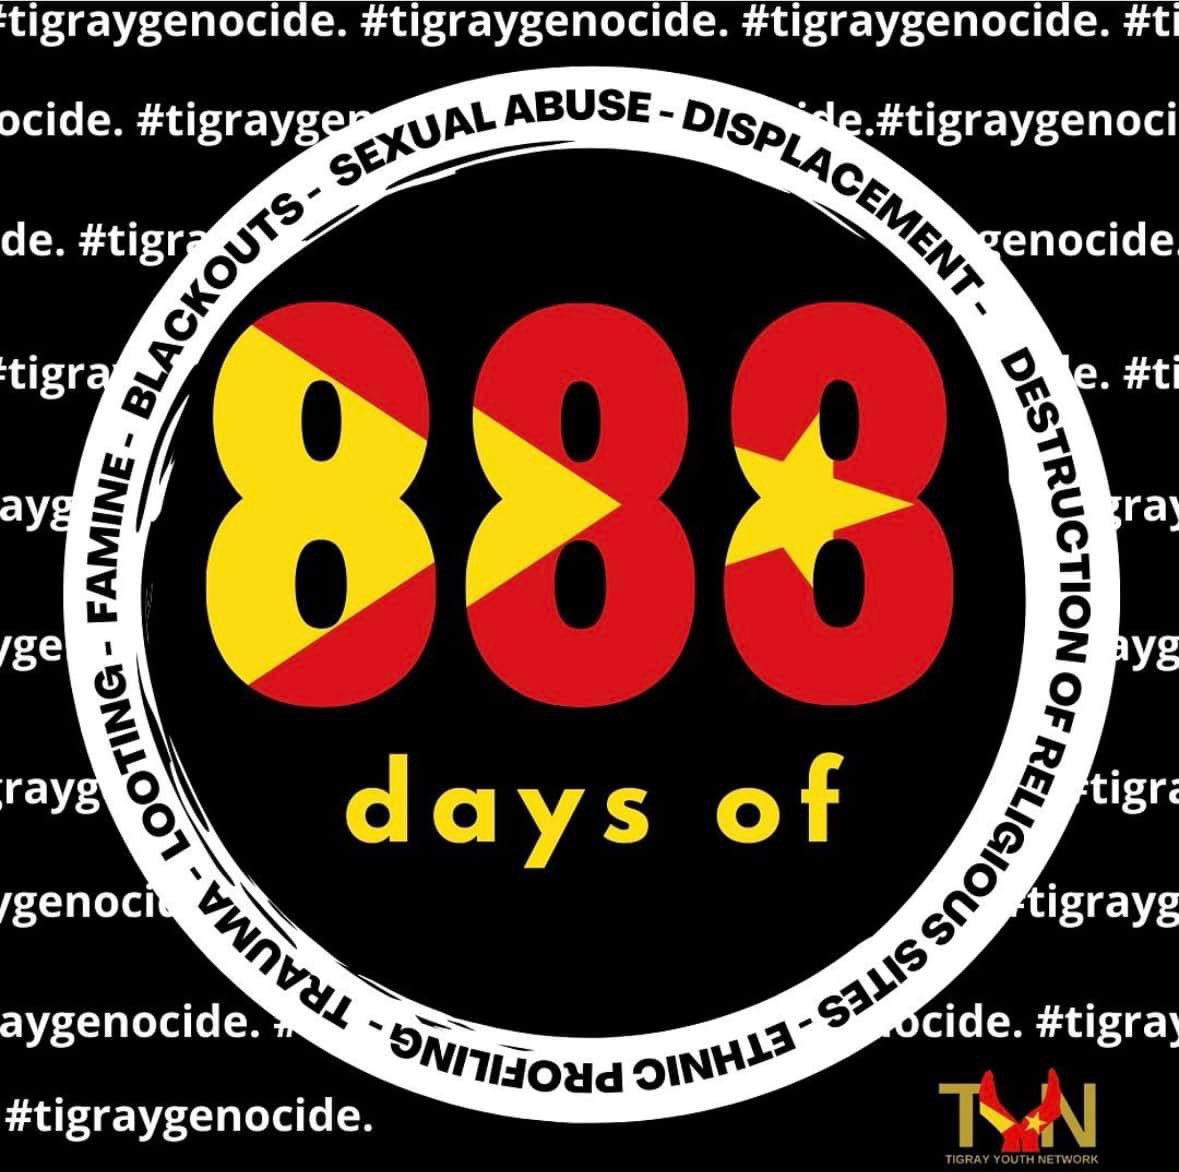 #888days of #TigrayGenocied

They are still being 

⭕️ Sieged 
⭕️ Massacred
⭕️ Looted &destroyed
⭕️ Cleansed
⭕️ Raped...etc by the Eritrea 🇪🇷troops.

#Tigray, #Irob and #Kunama 
Ethnic Groups Risk Extinction 

So dear @UNGeneva @USUN @UN @eu_eeas @irishmissionun @JosepBorrellF